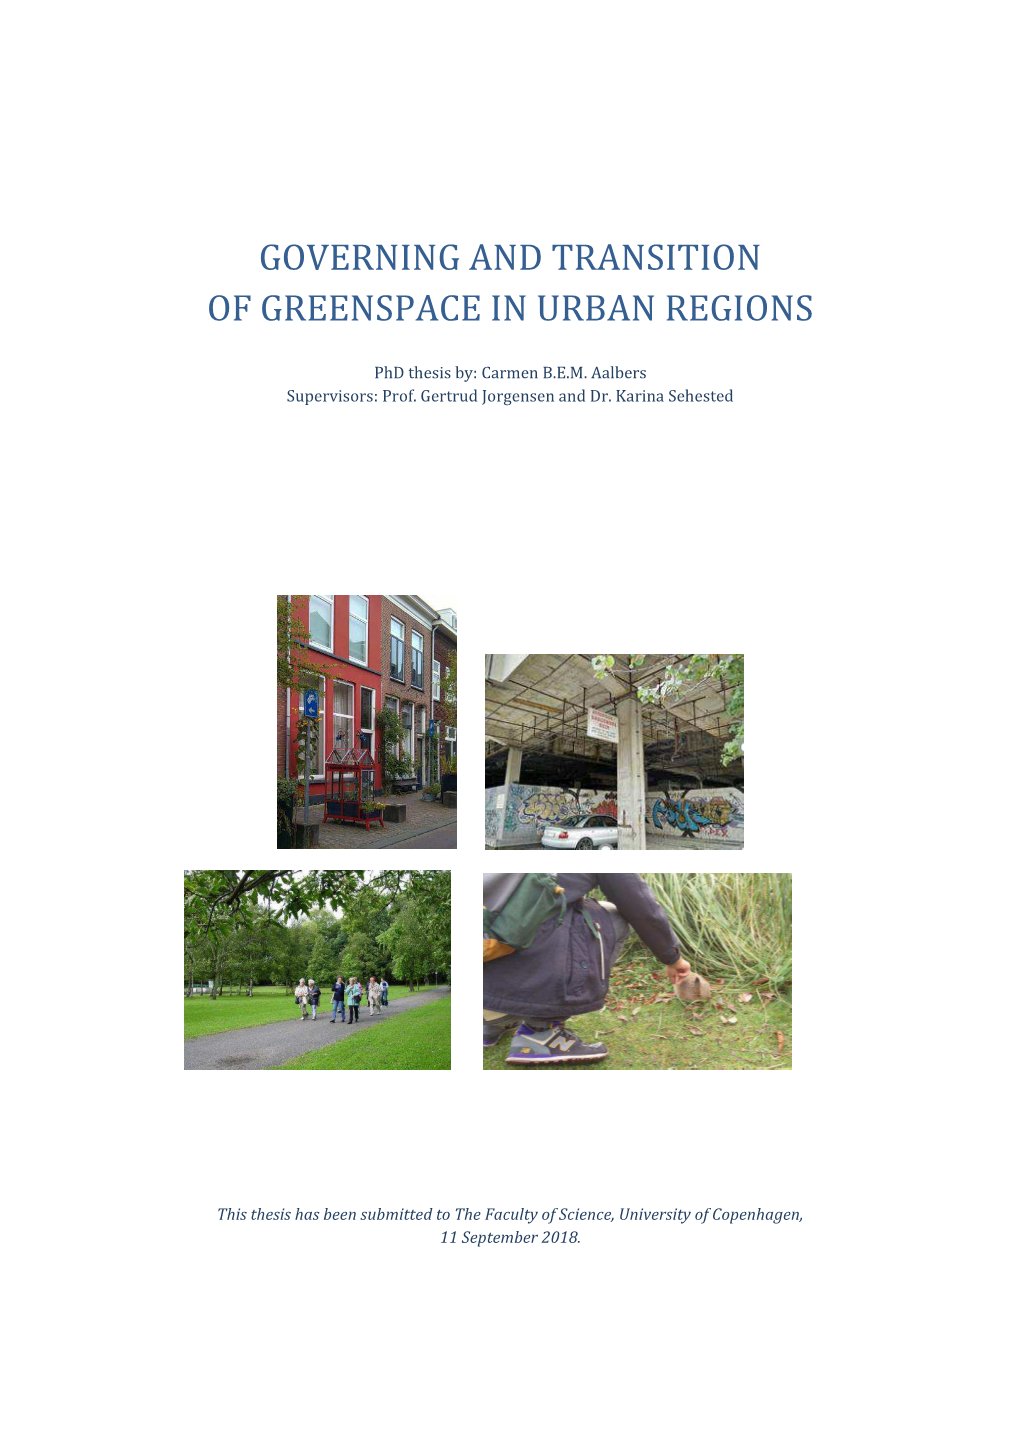 Governing and Transition of Greenspace in Urban Regions